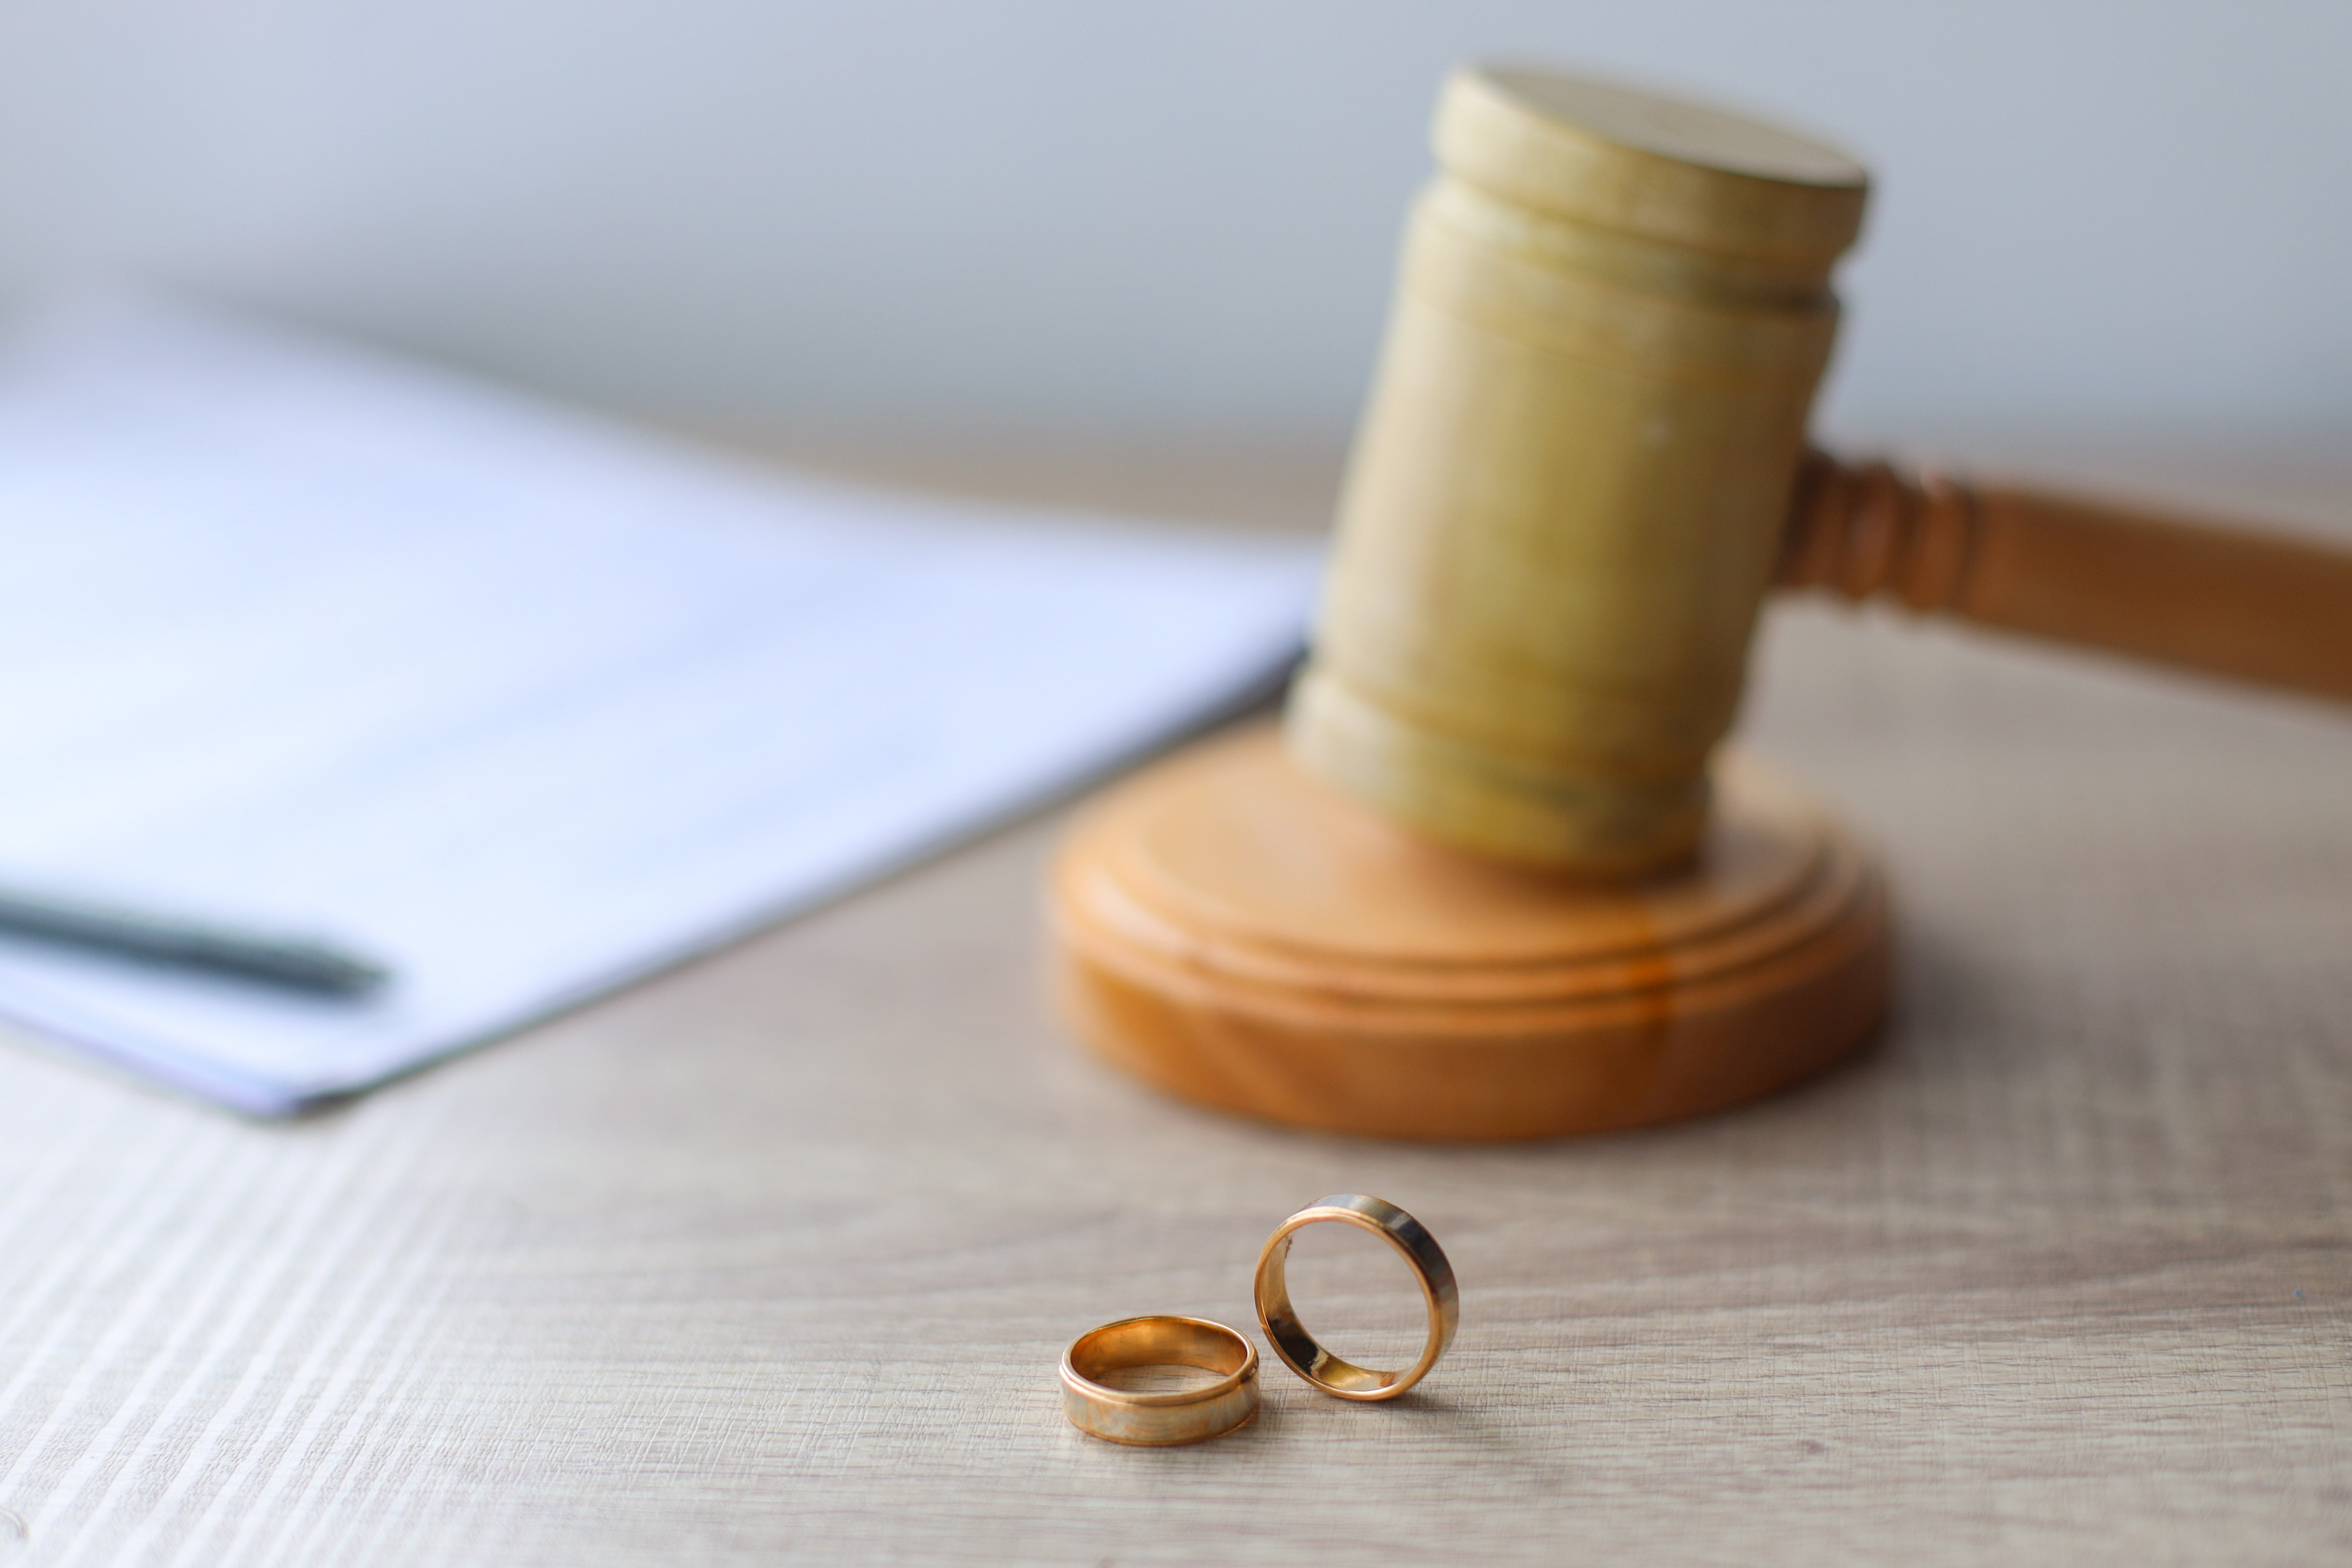 Gavel and wedding rings on a table with papers | New Direction Family Law